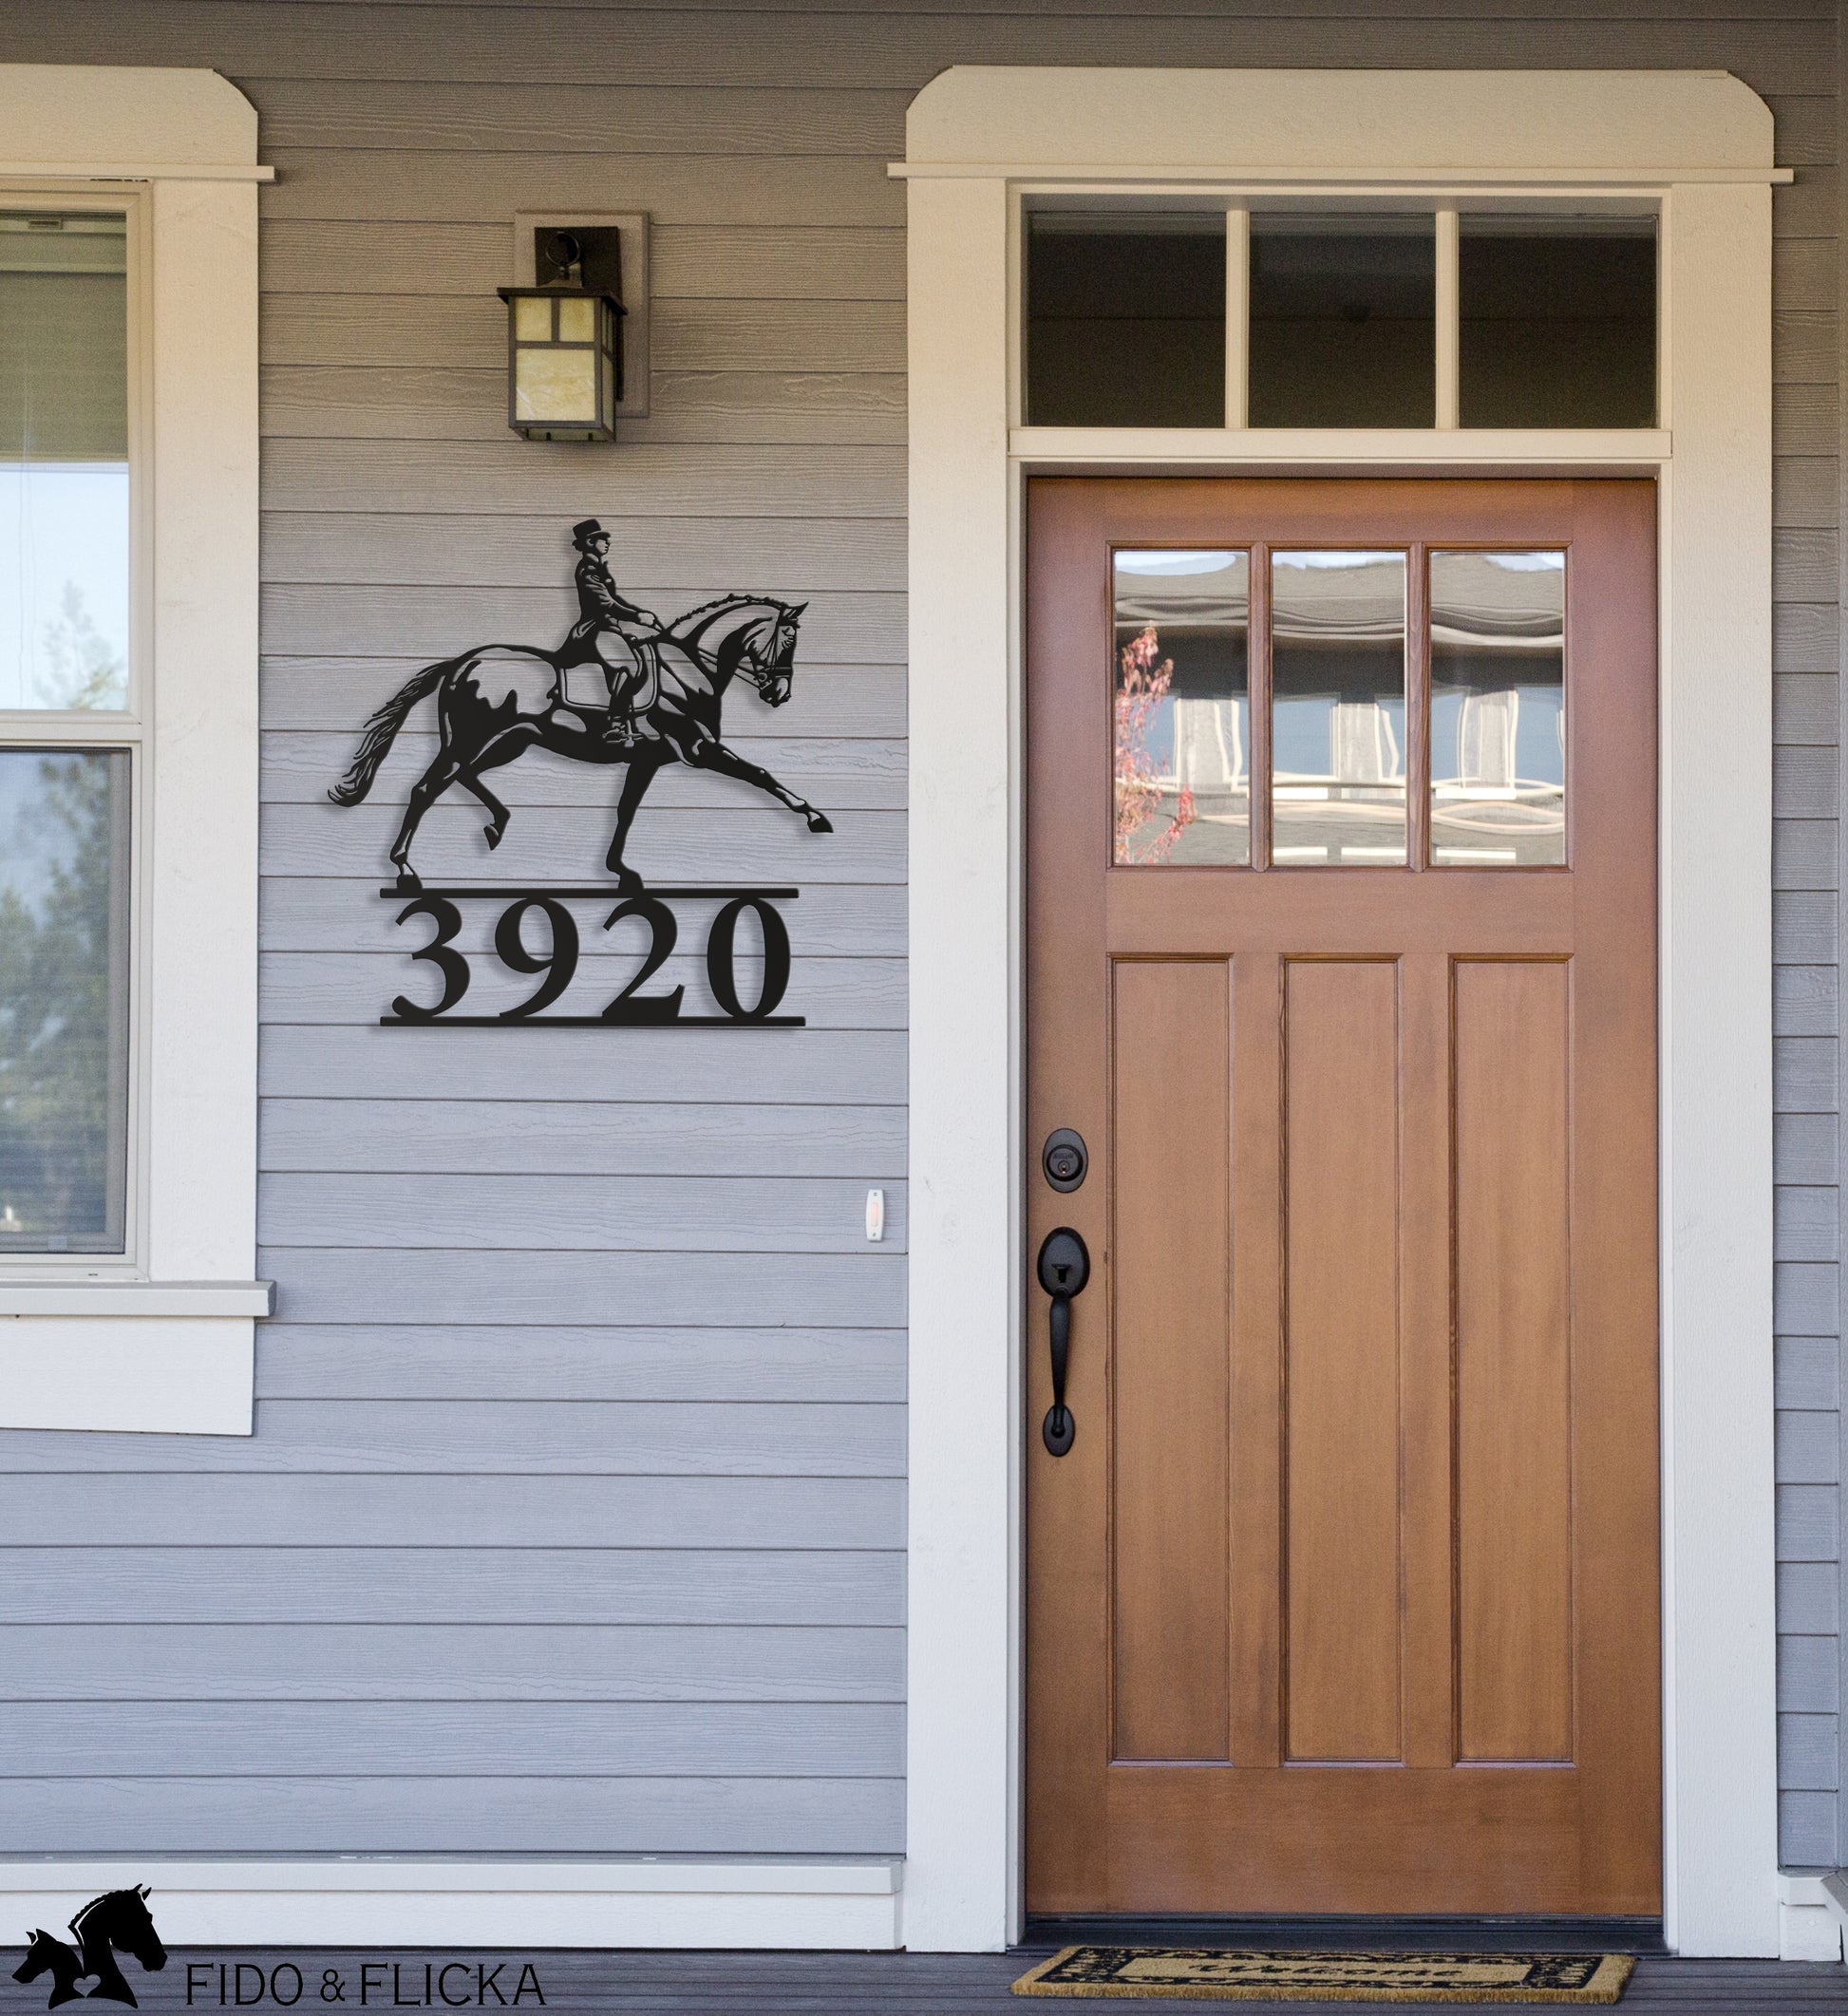 dressage horse house number by front door